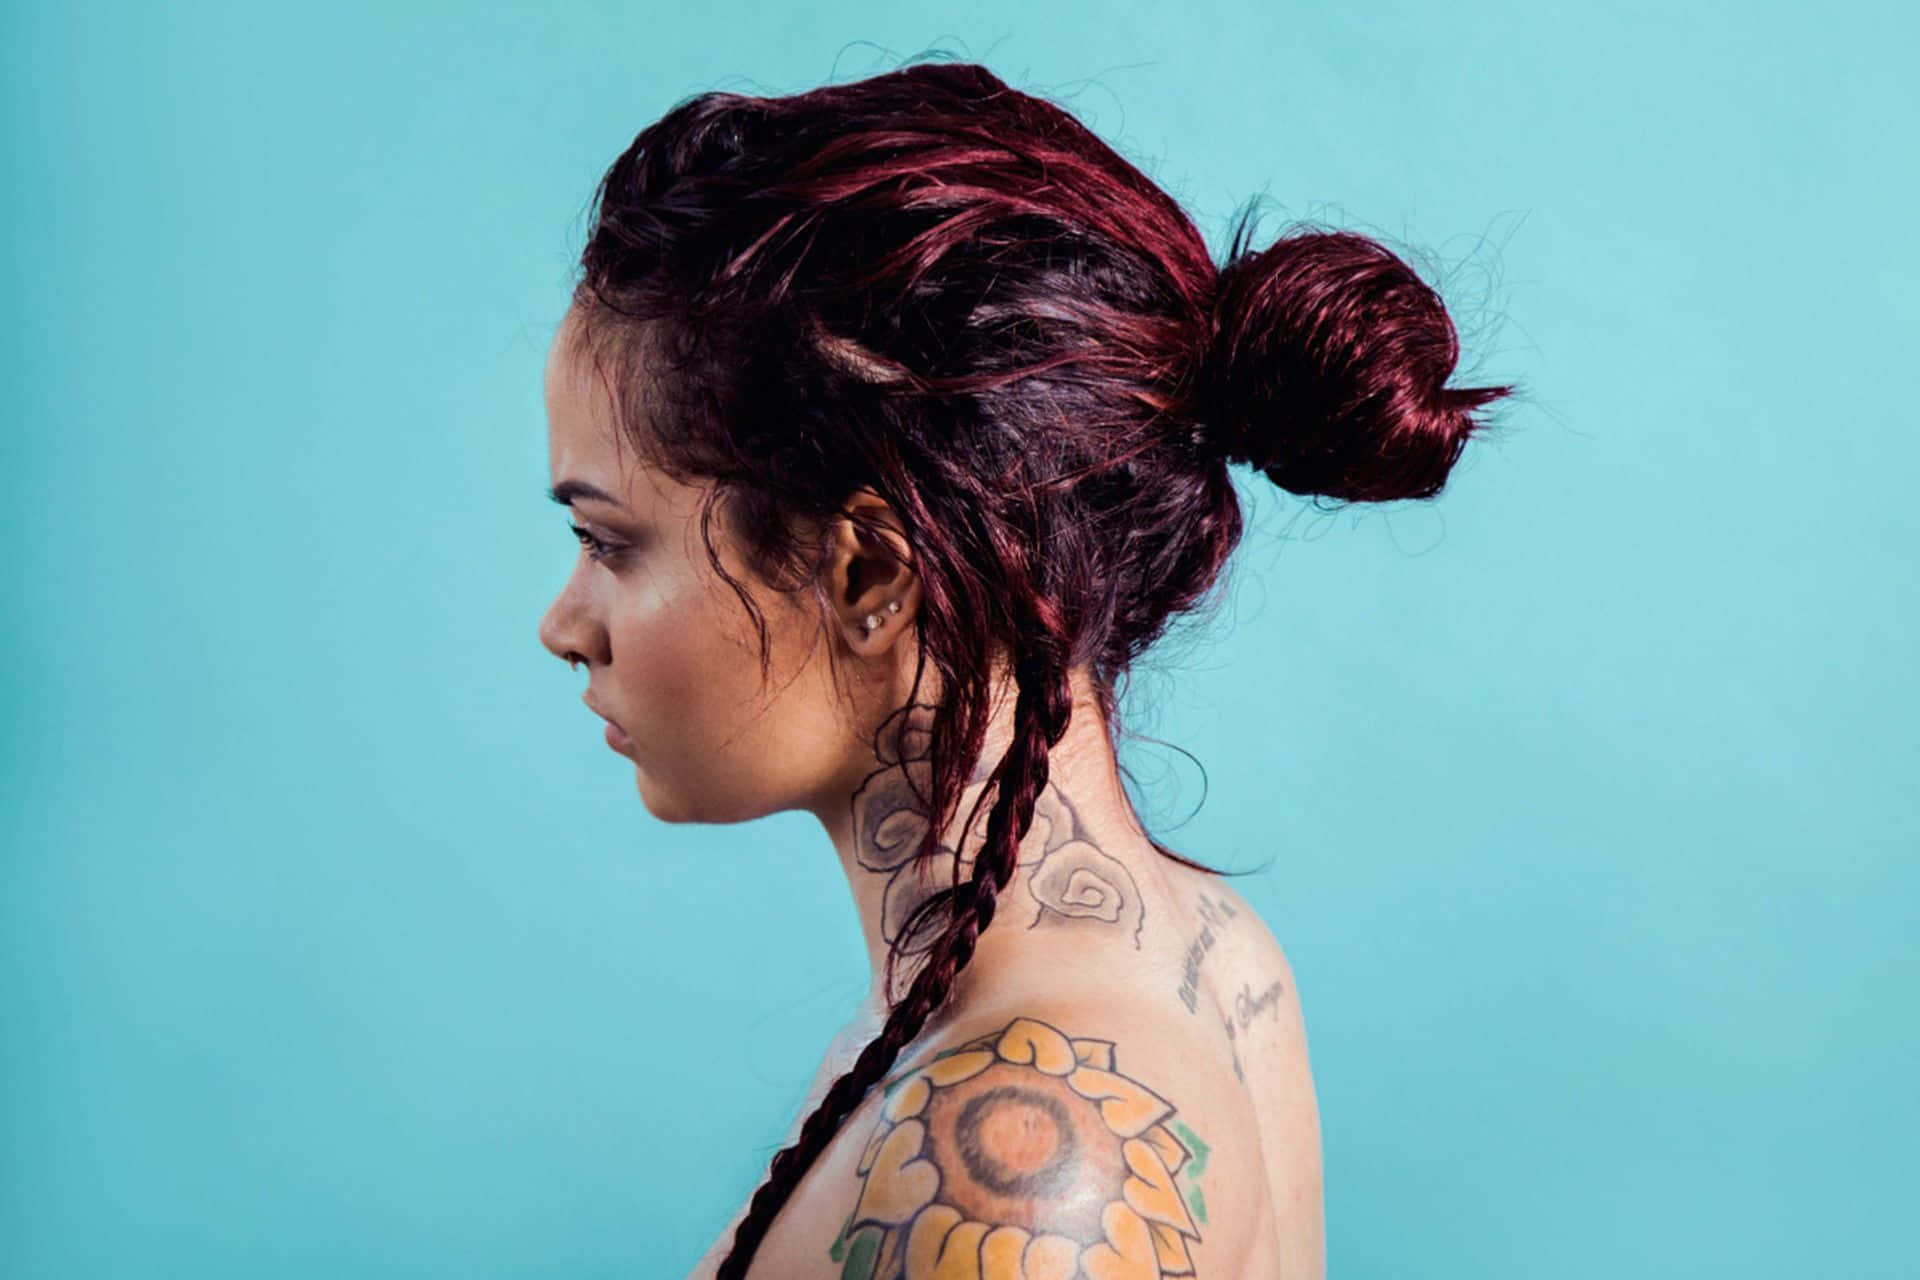 Kehlani Brings Her Vibrant Style To The Stage Wallpaper